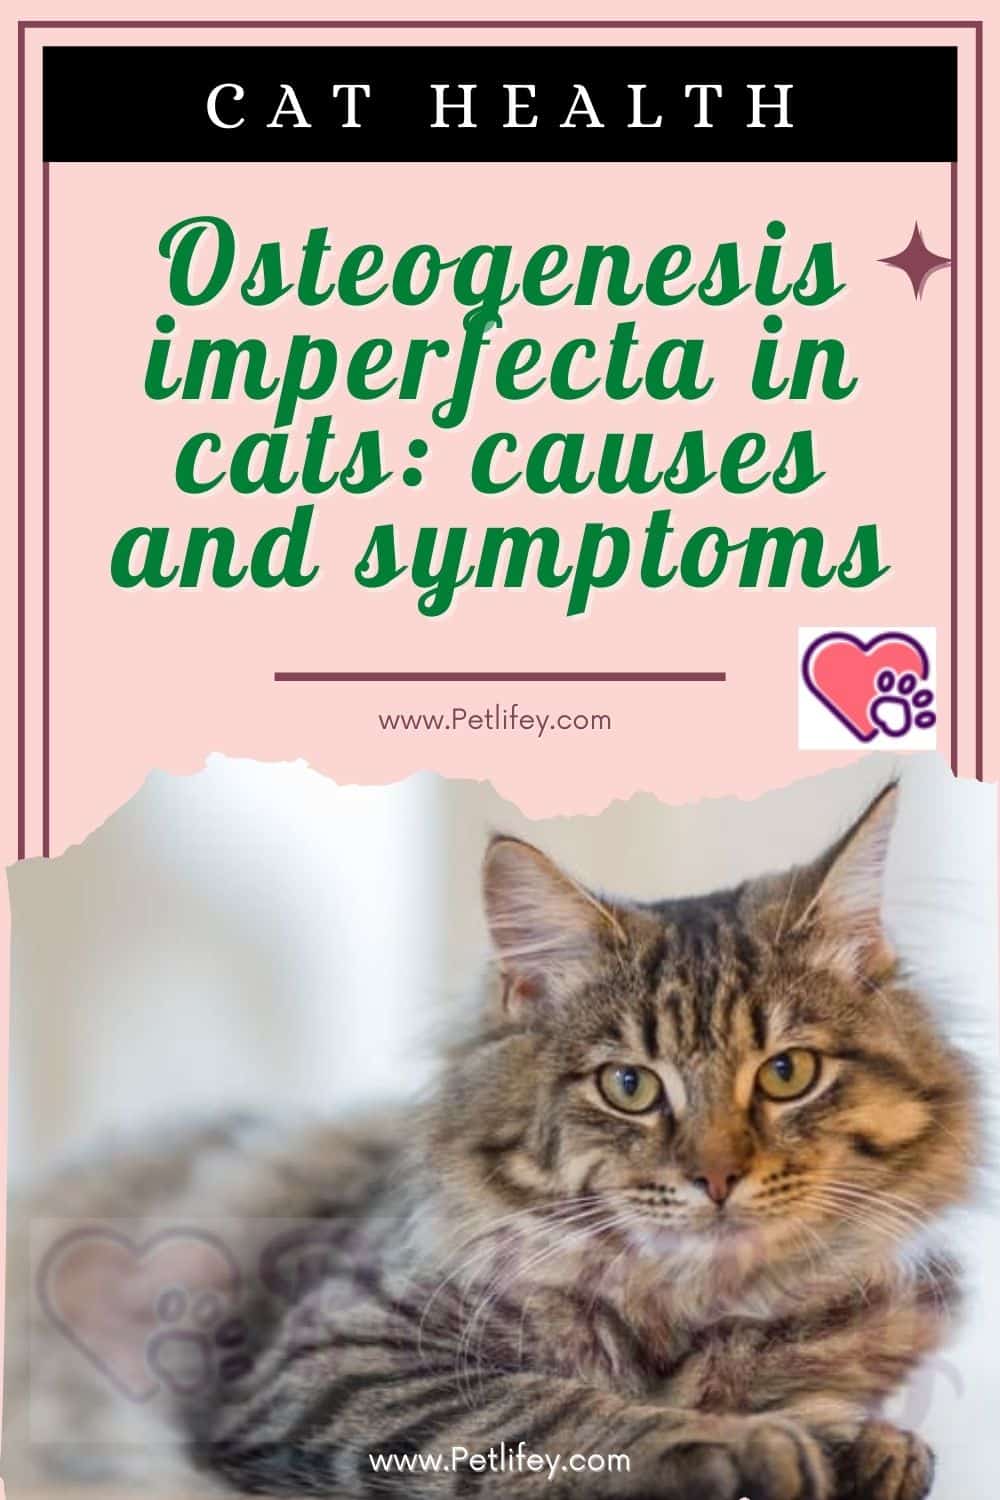 Osteogenesis imperfecta in cats: causes and symptoms